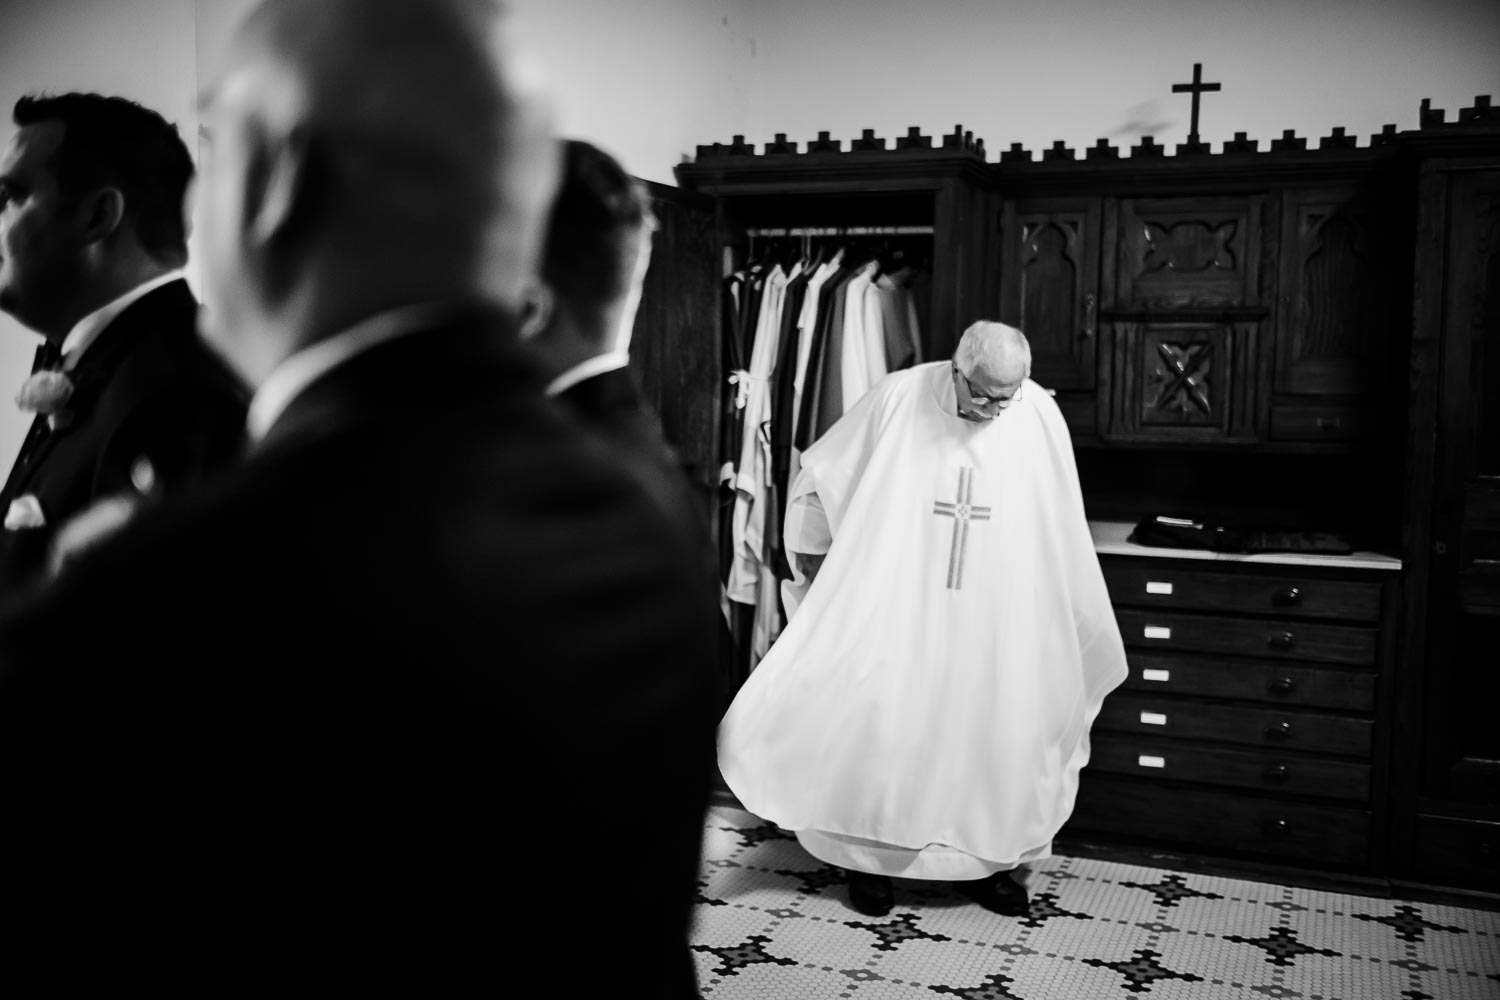 A priest checks his vestment moments before a wedding ceremony at Sacred Heart Chapel San antonio, Texas